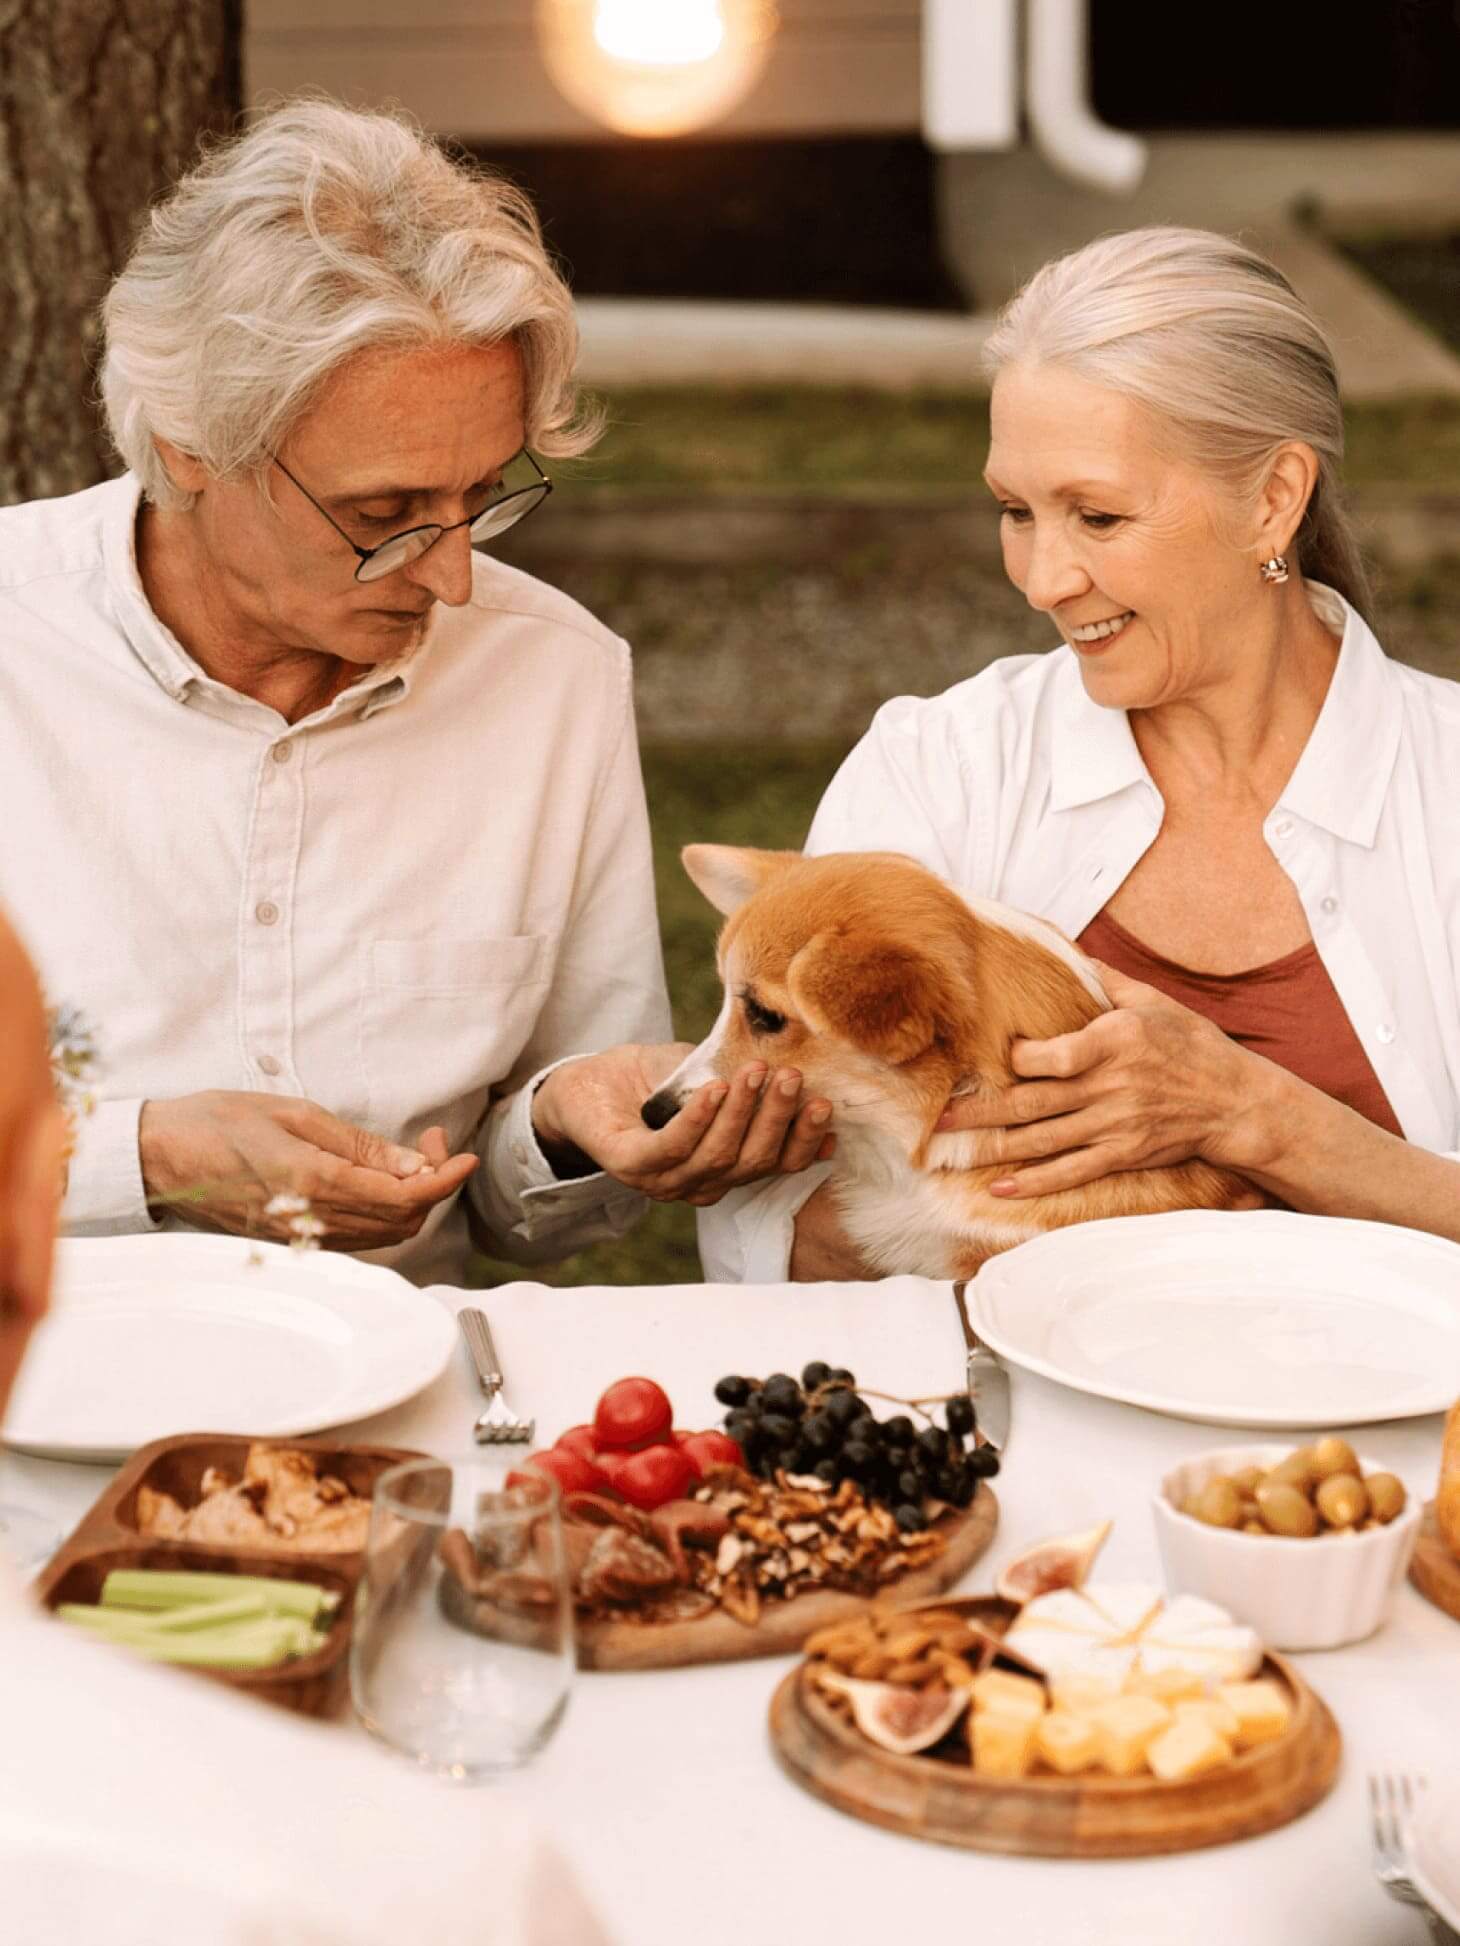 Two elderly people sitting at a table full of food, feeding a dog